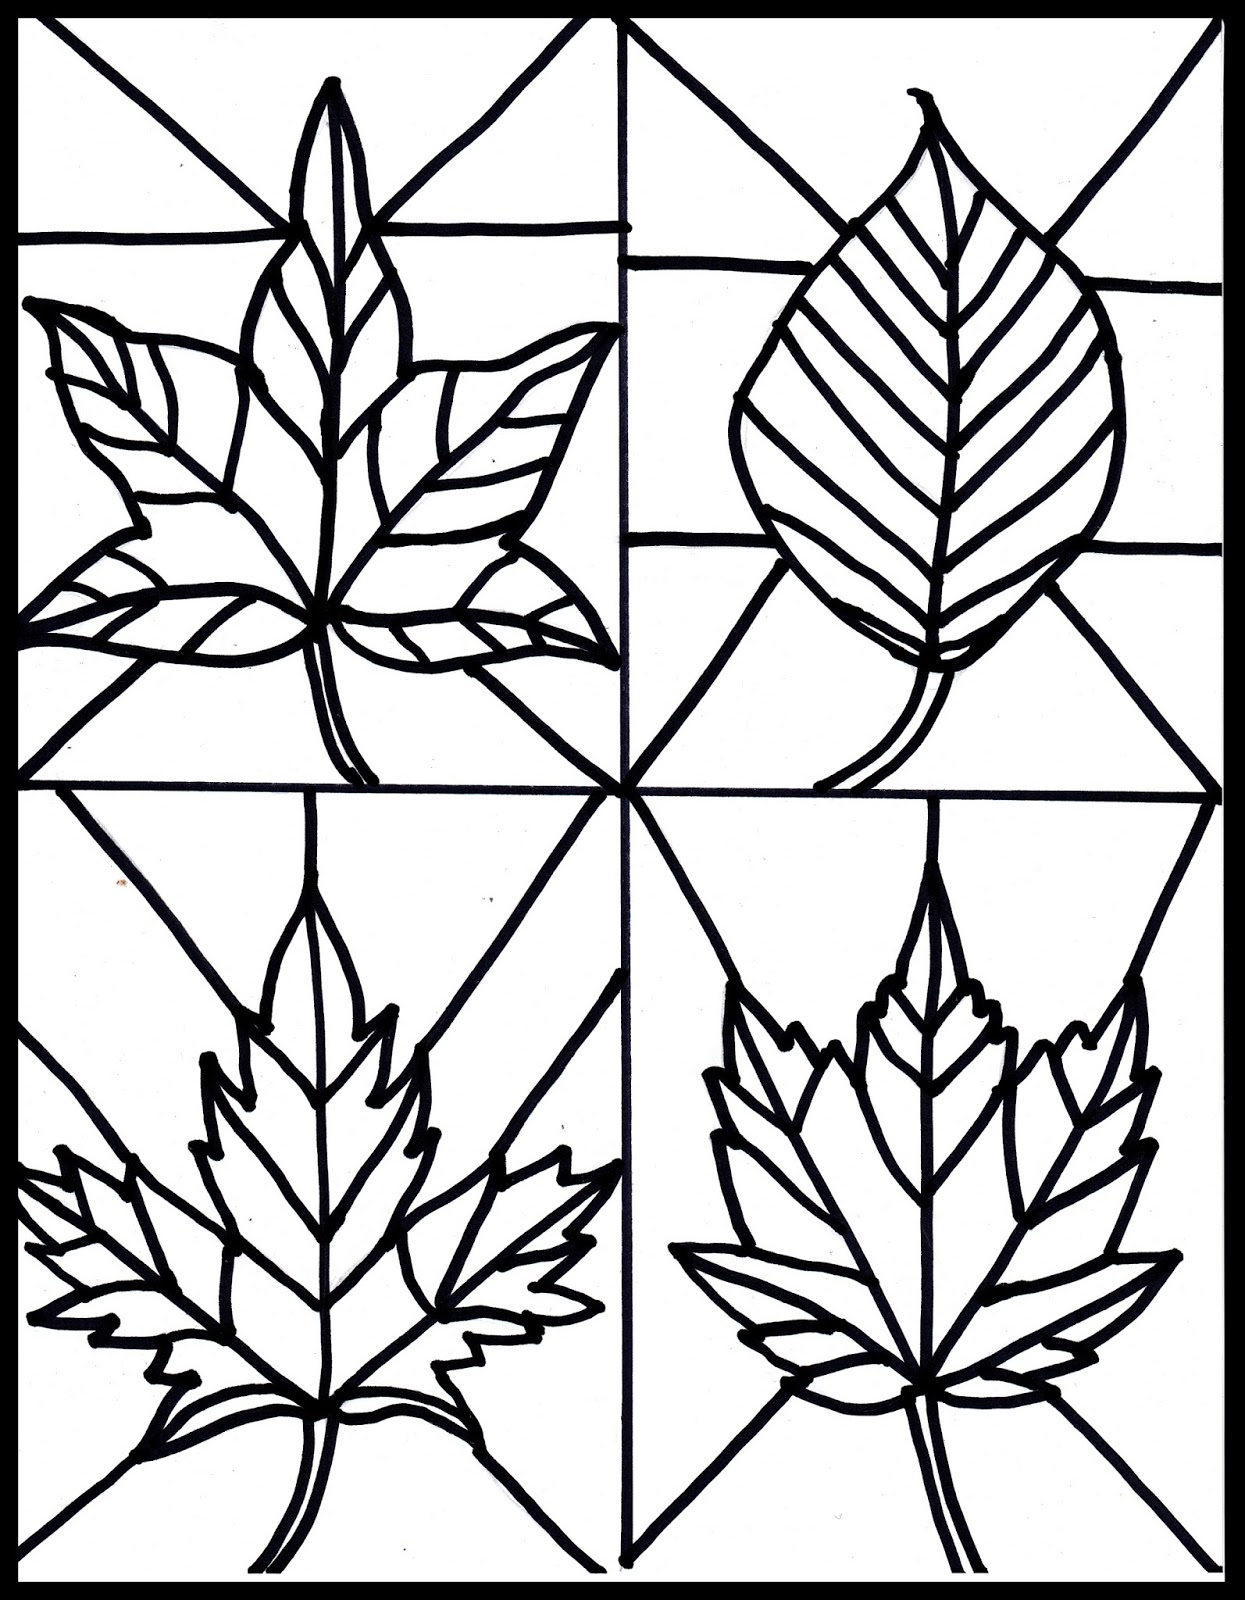 Coloring Pages : Autumn Leaves Coloring Pages Color Impressive Cool - Free Printable Fall Leaves Coloring Pages